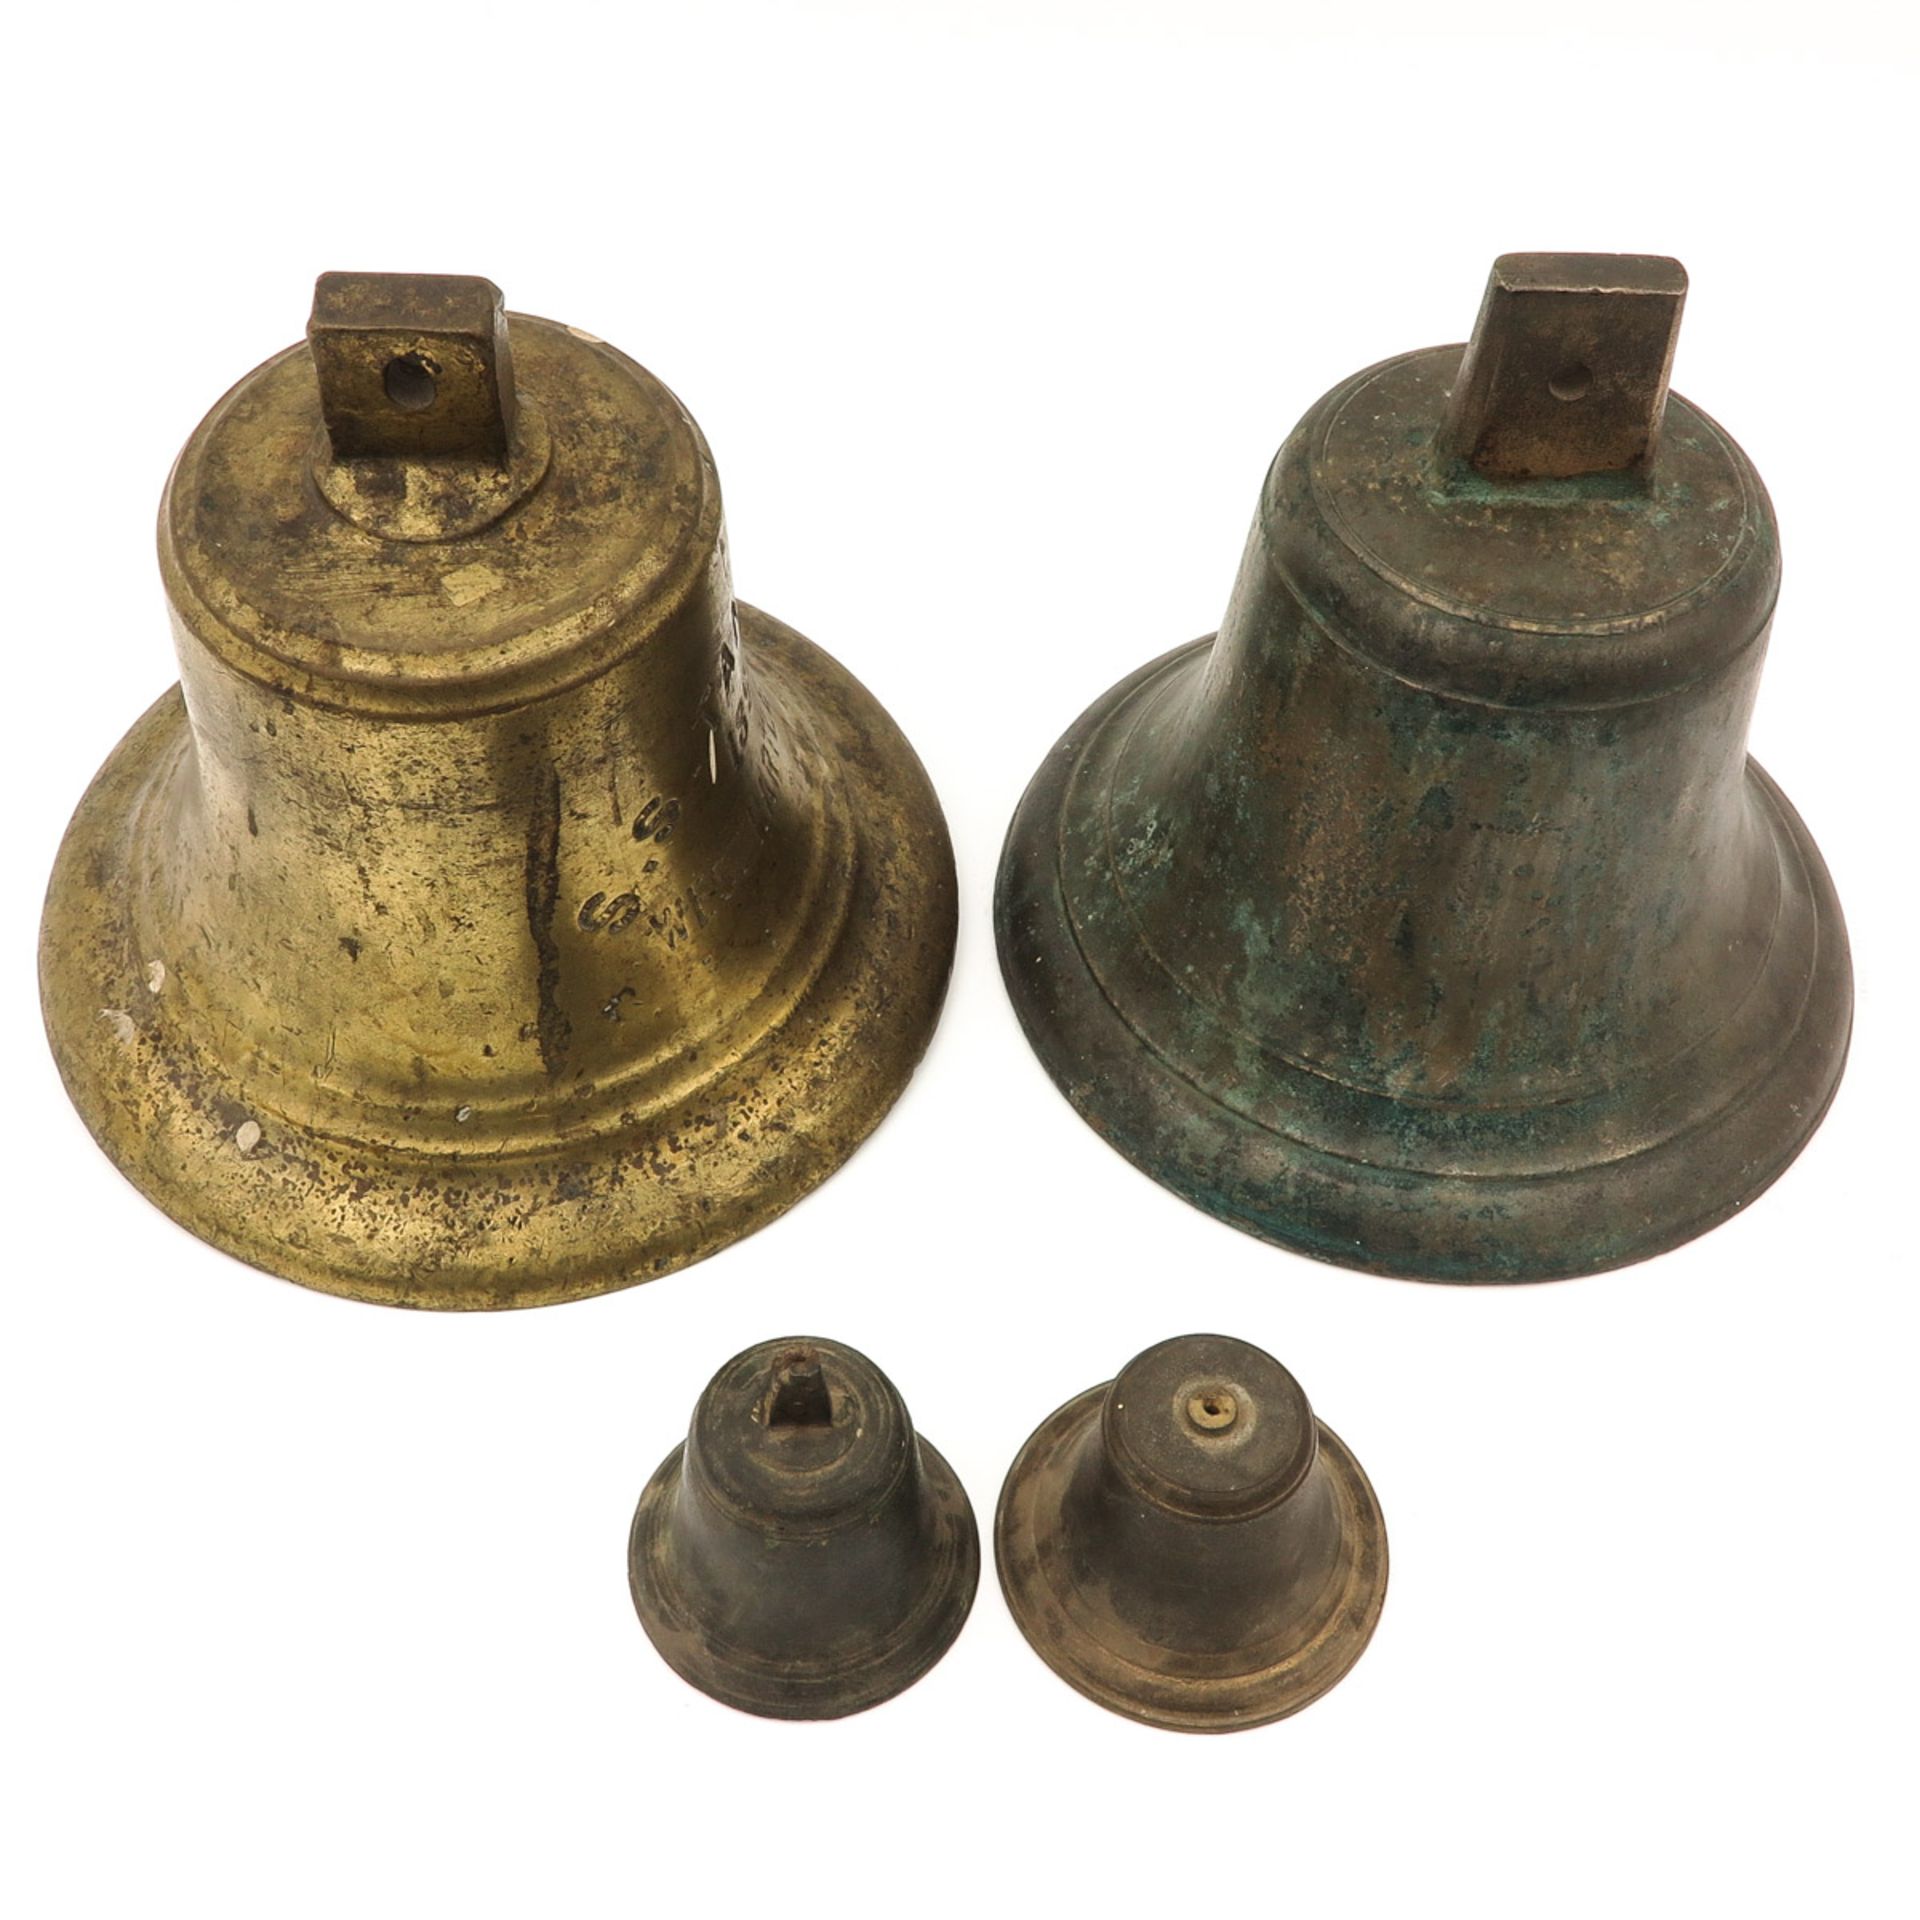 A Lot of 4 Copper Bells - Image 5 of 7